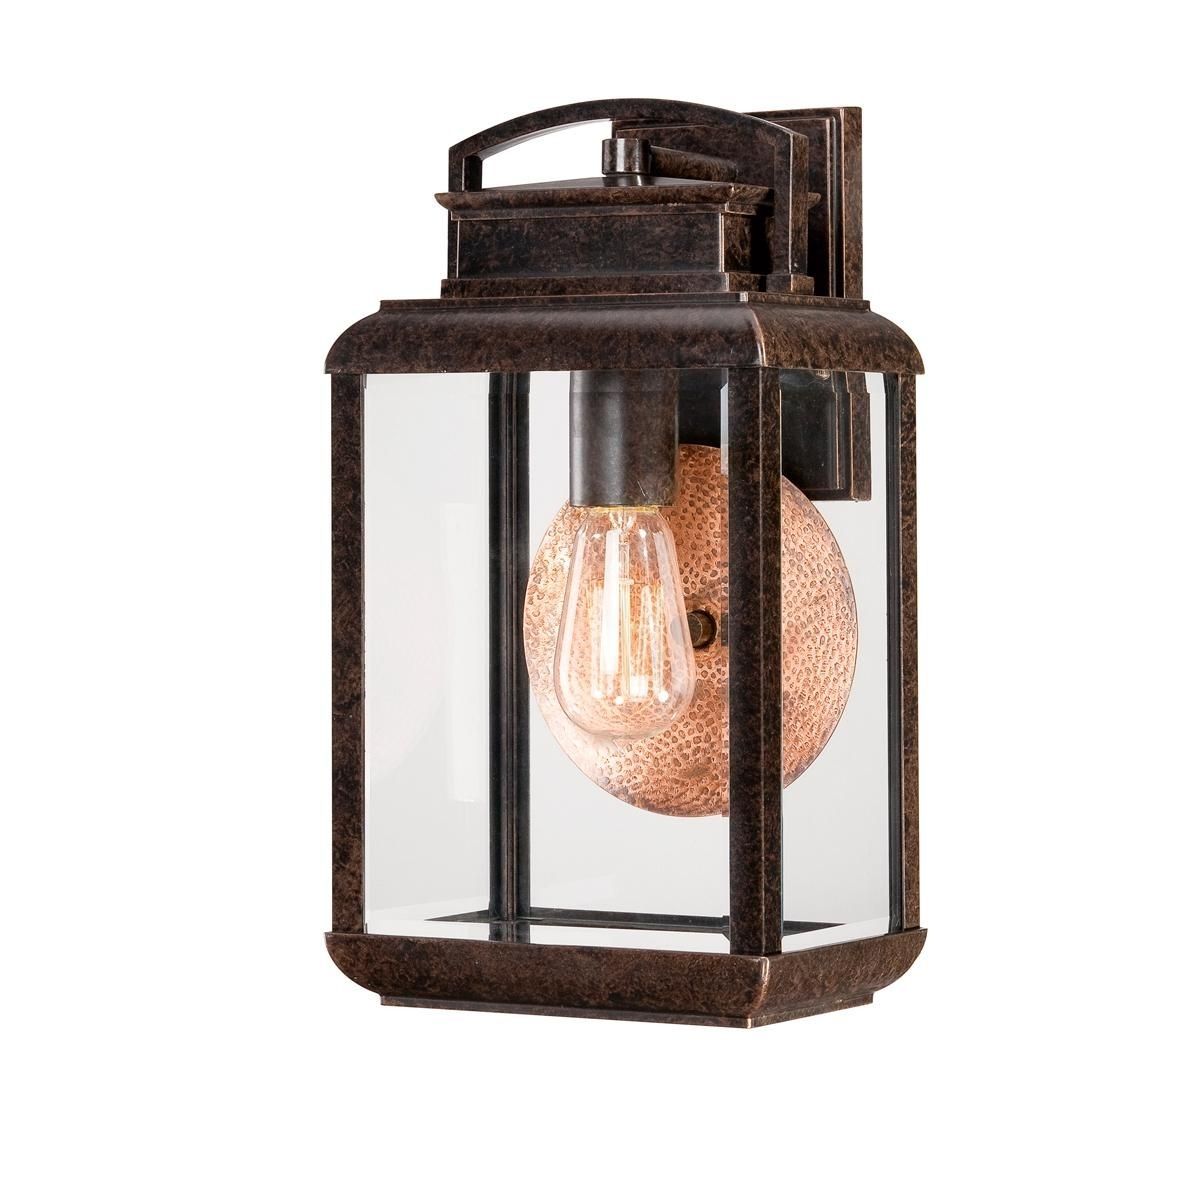 Small Modern Colonial Outdoor Wall Light | For The Home | Pinterest For Quality Outdoor Wall Lighting (View 13 of 15)